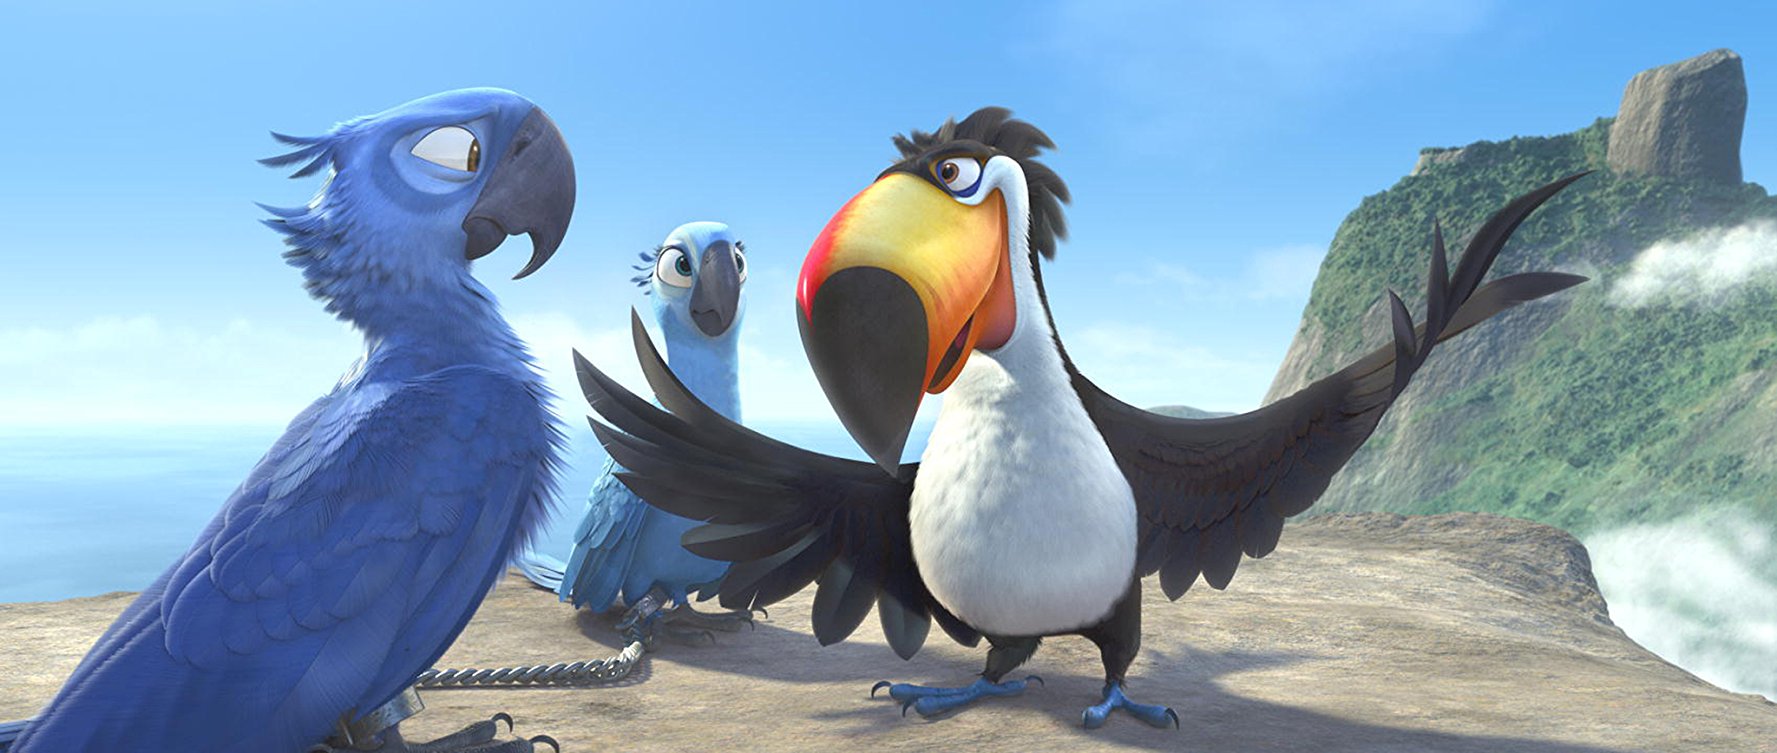 Character Blu List Of Movies Character Rio 2 Rio